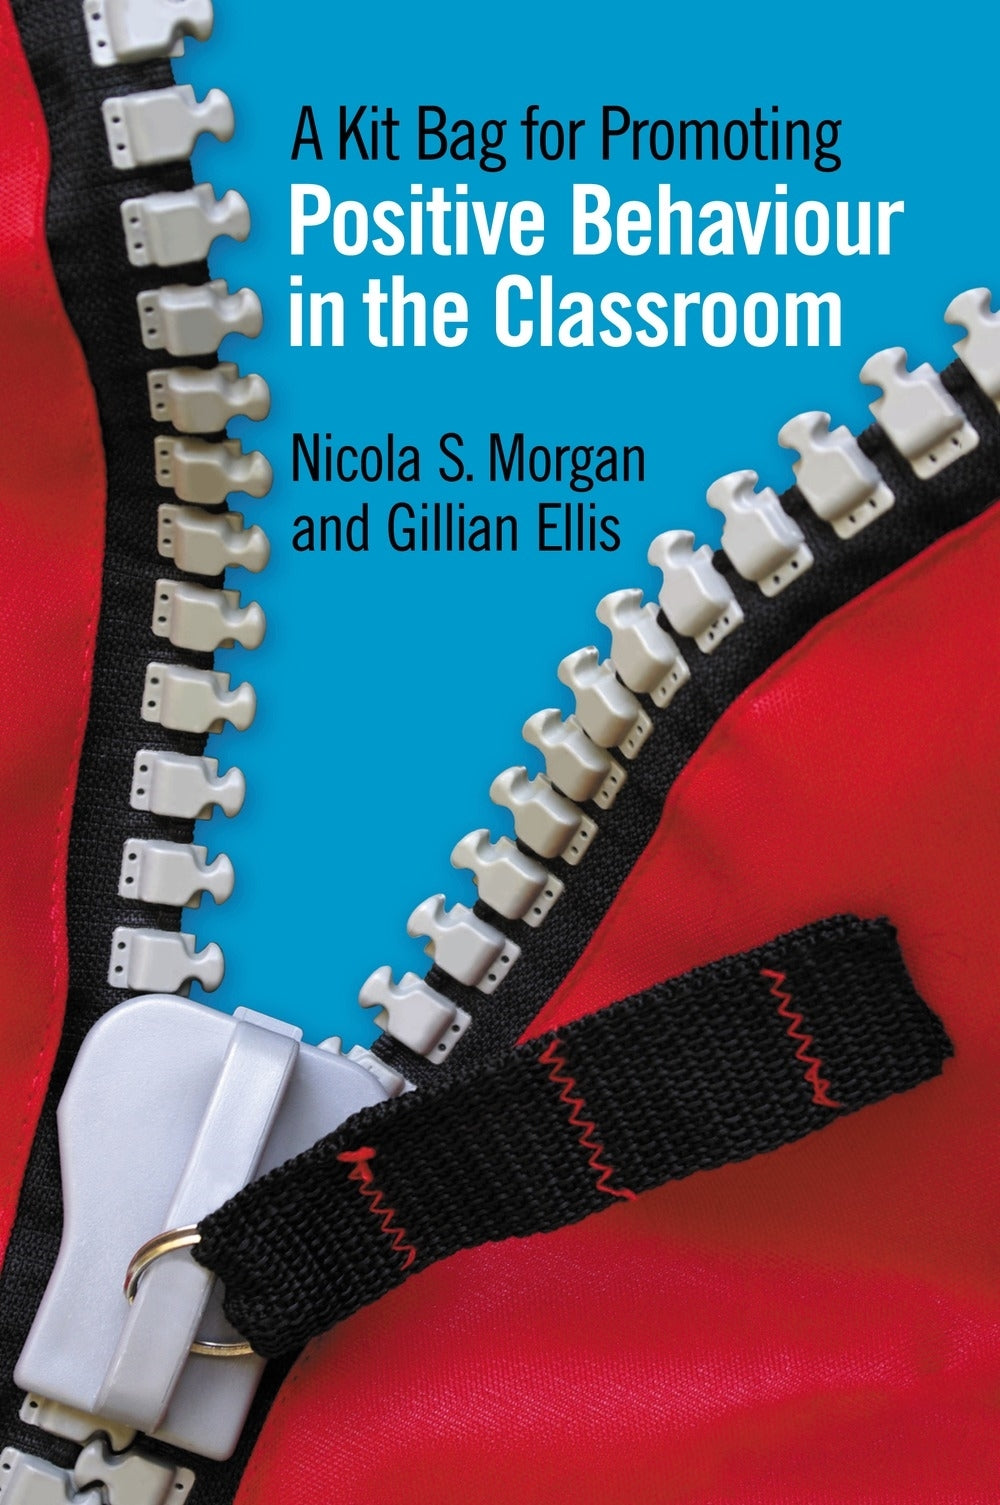 A Kit Bag for Promoting Positive Behaviour in the Classroom by Nicola Morgan, Gill Ellis